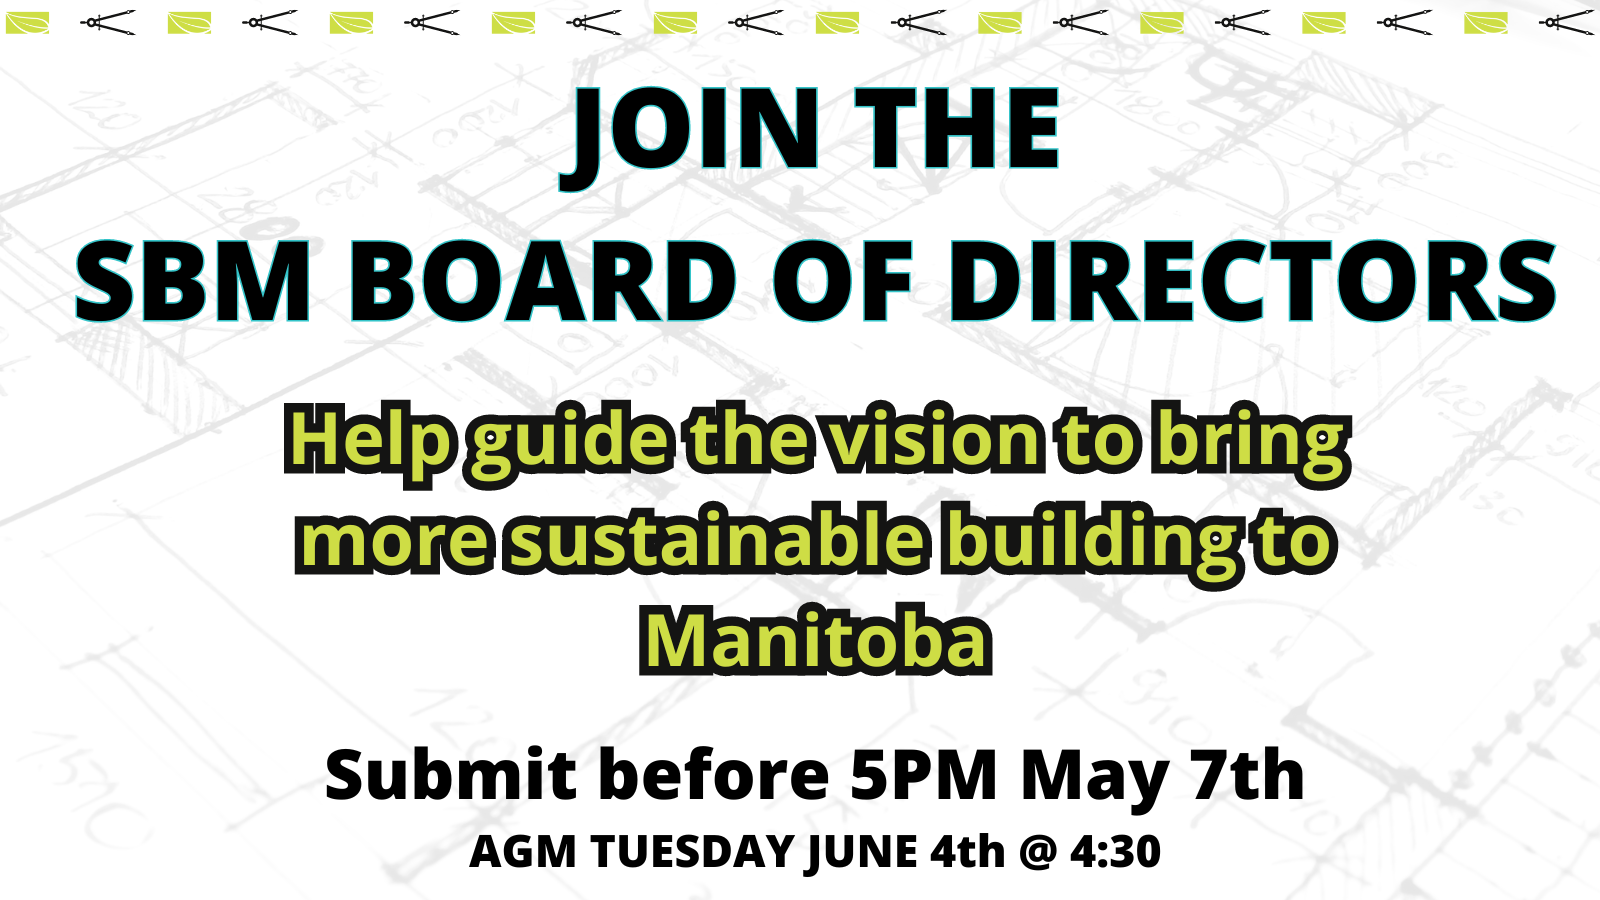 Join the SBM Board of Directors Help guide the vision to bring more sustainable building to Manitoba Submit before 5PM May 7th AGM Tuesday June 4th at 4:30